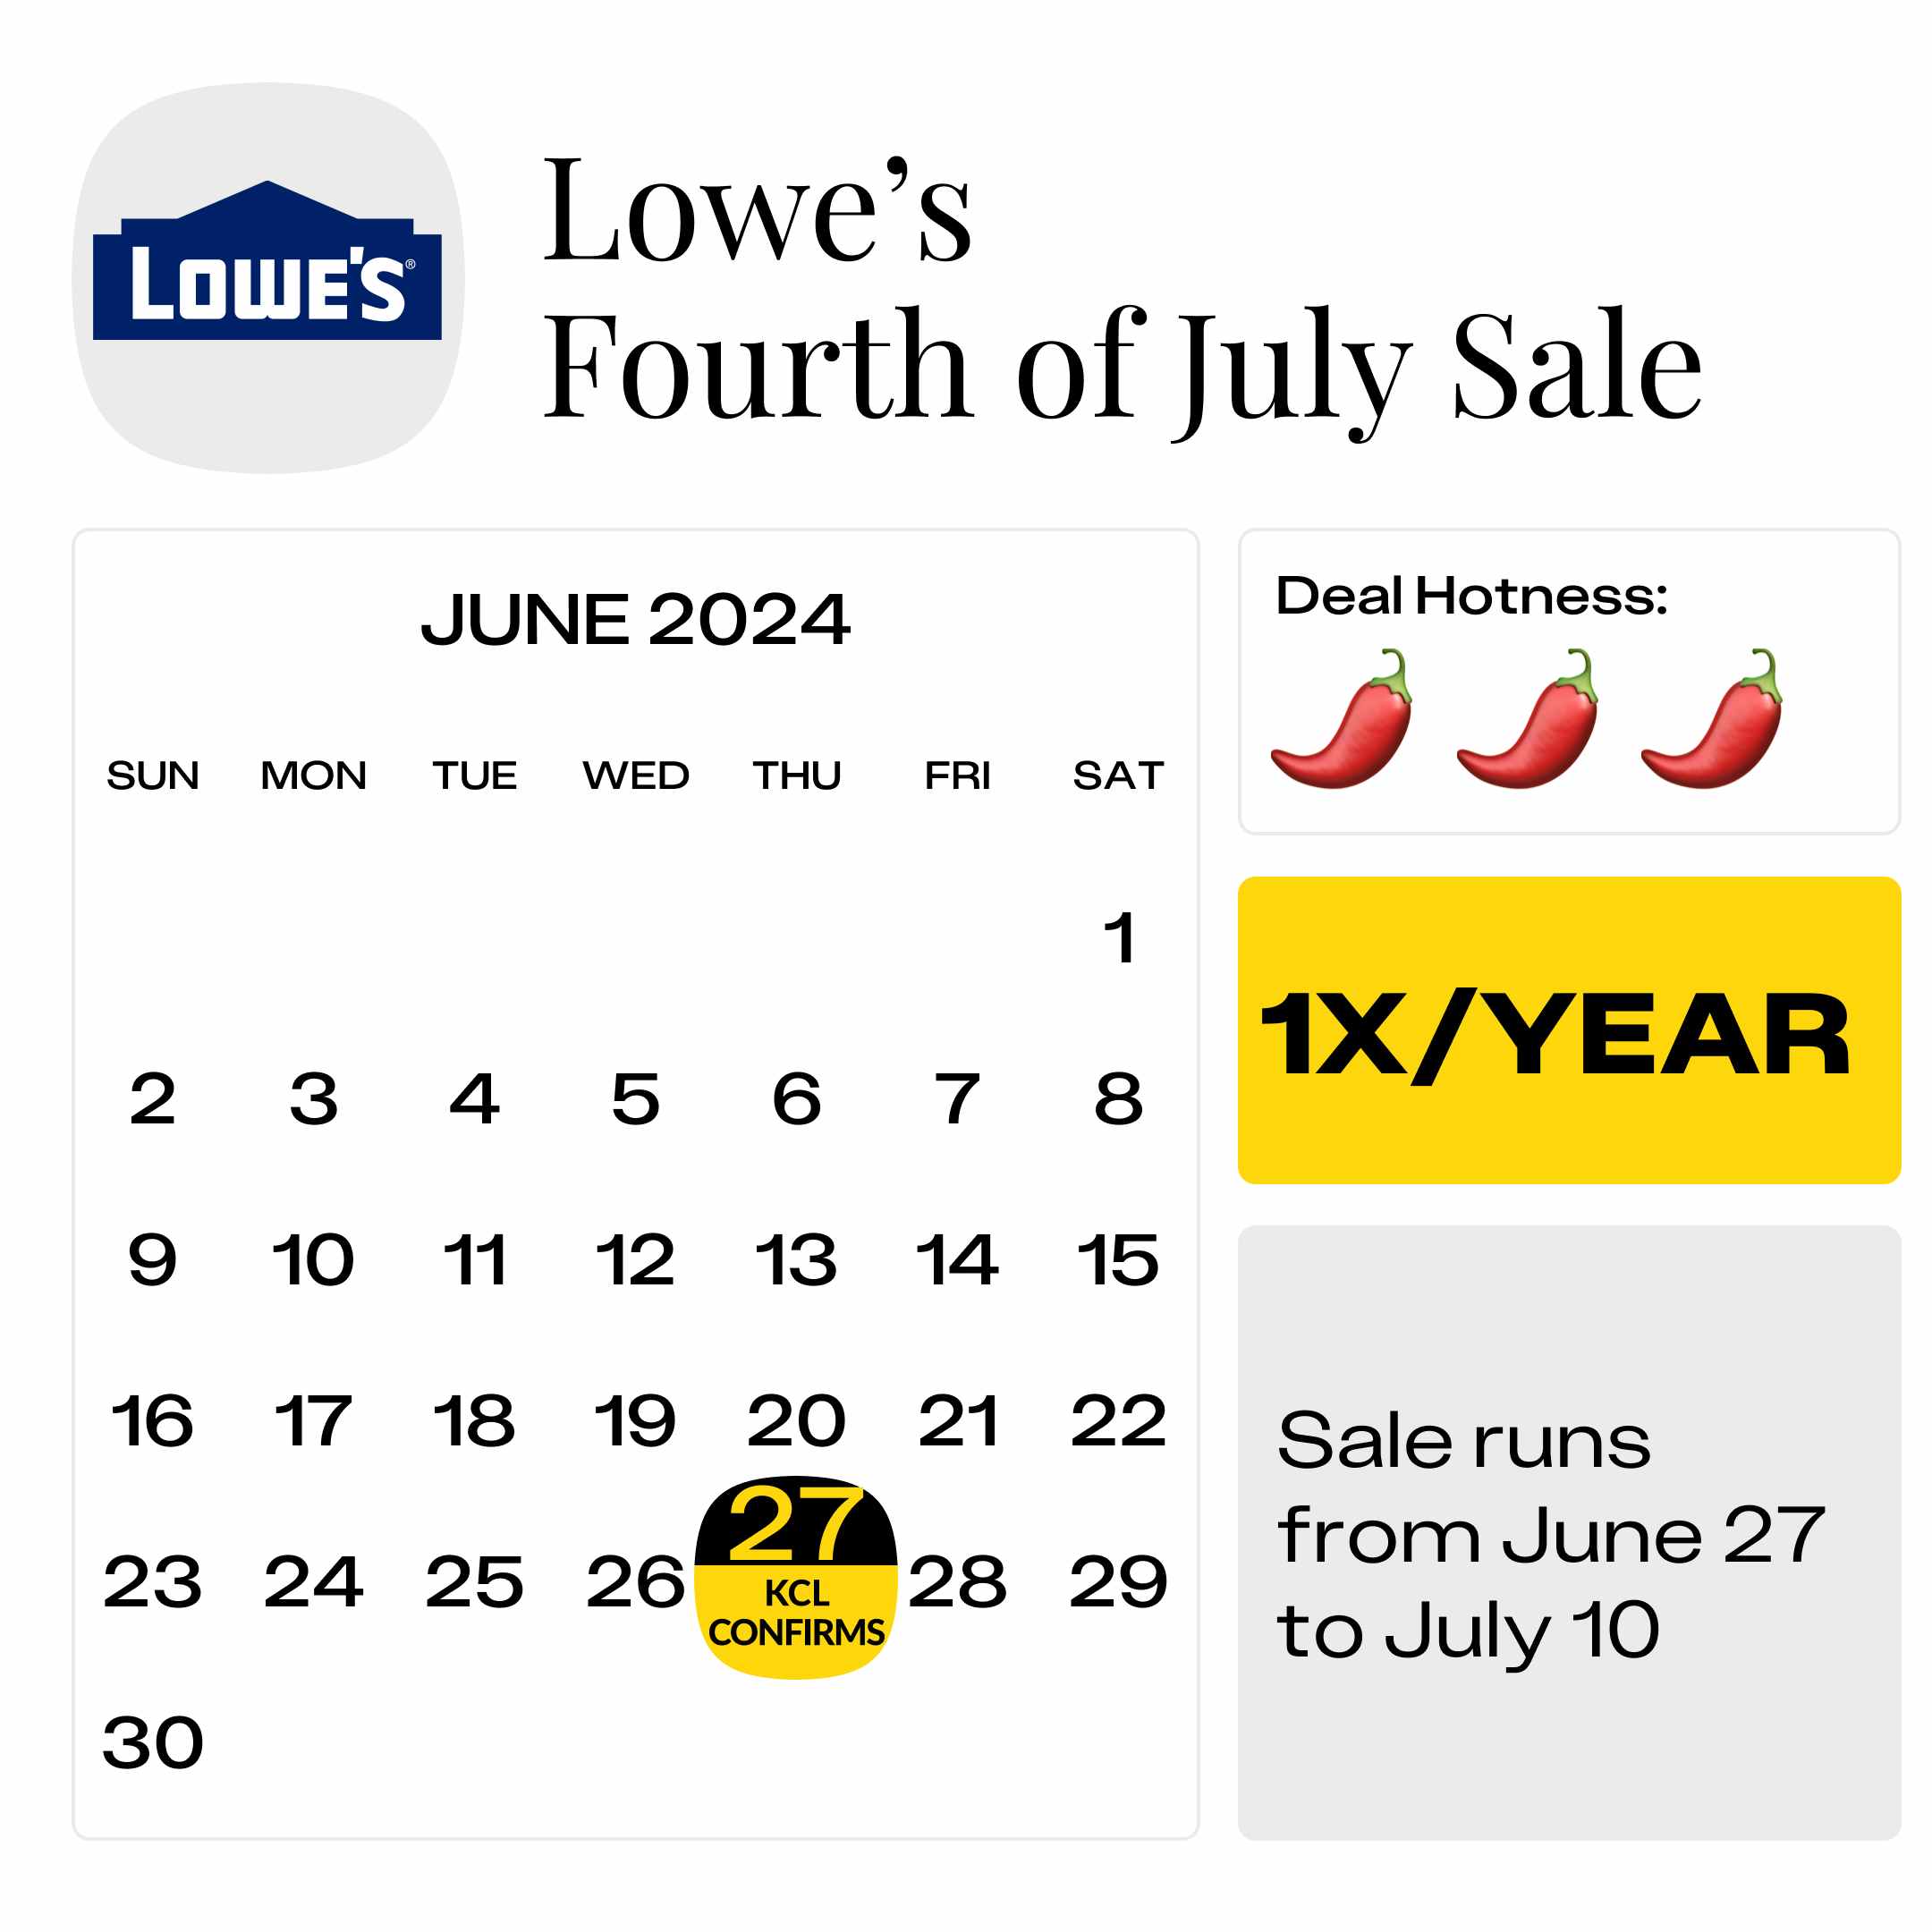 Lowes-Fourth-of-July-Sale (2)